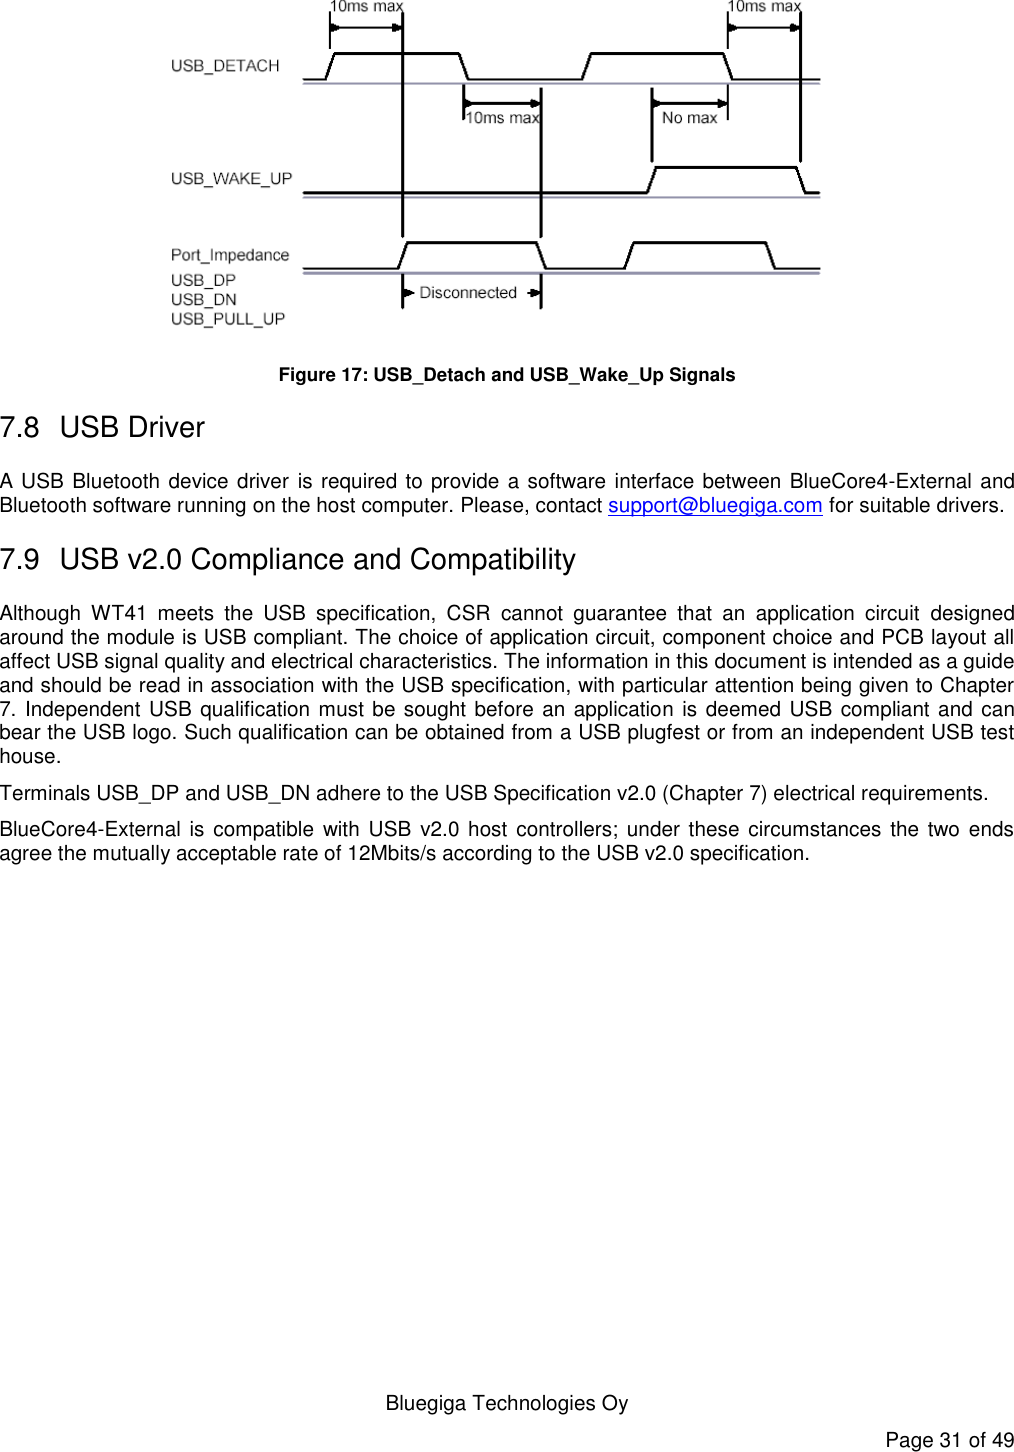   Bluegiga Technologies Oy Page 31 of 49  Figure 17: USB_Detach and USB_Wake_Up Signals 7.8  USB Driver A USB Bluetooth device driver is required to provide a software interface between BlueCore4-External and Bluetooth software running on the host computer. Please, contact support@bluegiga.com for suitable drivers. 7.9  USB v2.0 Compliance and Compatibility Although  WT41  meets  the  USB  specification,  CSR  cannot  guarantee  that  an  application  circuit  designed around the module is USB compliant. The choice of application circuit, component choice and PCB layout all affect USB signal quality and electrical characteristics. The information in this document is intended as a guide and should be read in association with the USB specification, with particular attention being given to Chapter 7. Independent USB qualification must be sought before an application is deemed USB compliant and can bear the USB logo. Such qualification can be obtained from a USB plugfest or from an independent USB test house. Terminals USB_DP and USB_DN adhere to the USB Specification v2.0 (Chapter 7) electrical requirements. BlueCore4-External  is  compatible  with  USB v2.0 host controllers; under  these circumstances the two  ends agree the mutually acceptable rate of 12Mbits/s according to the USB v2.0 specification.  